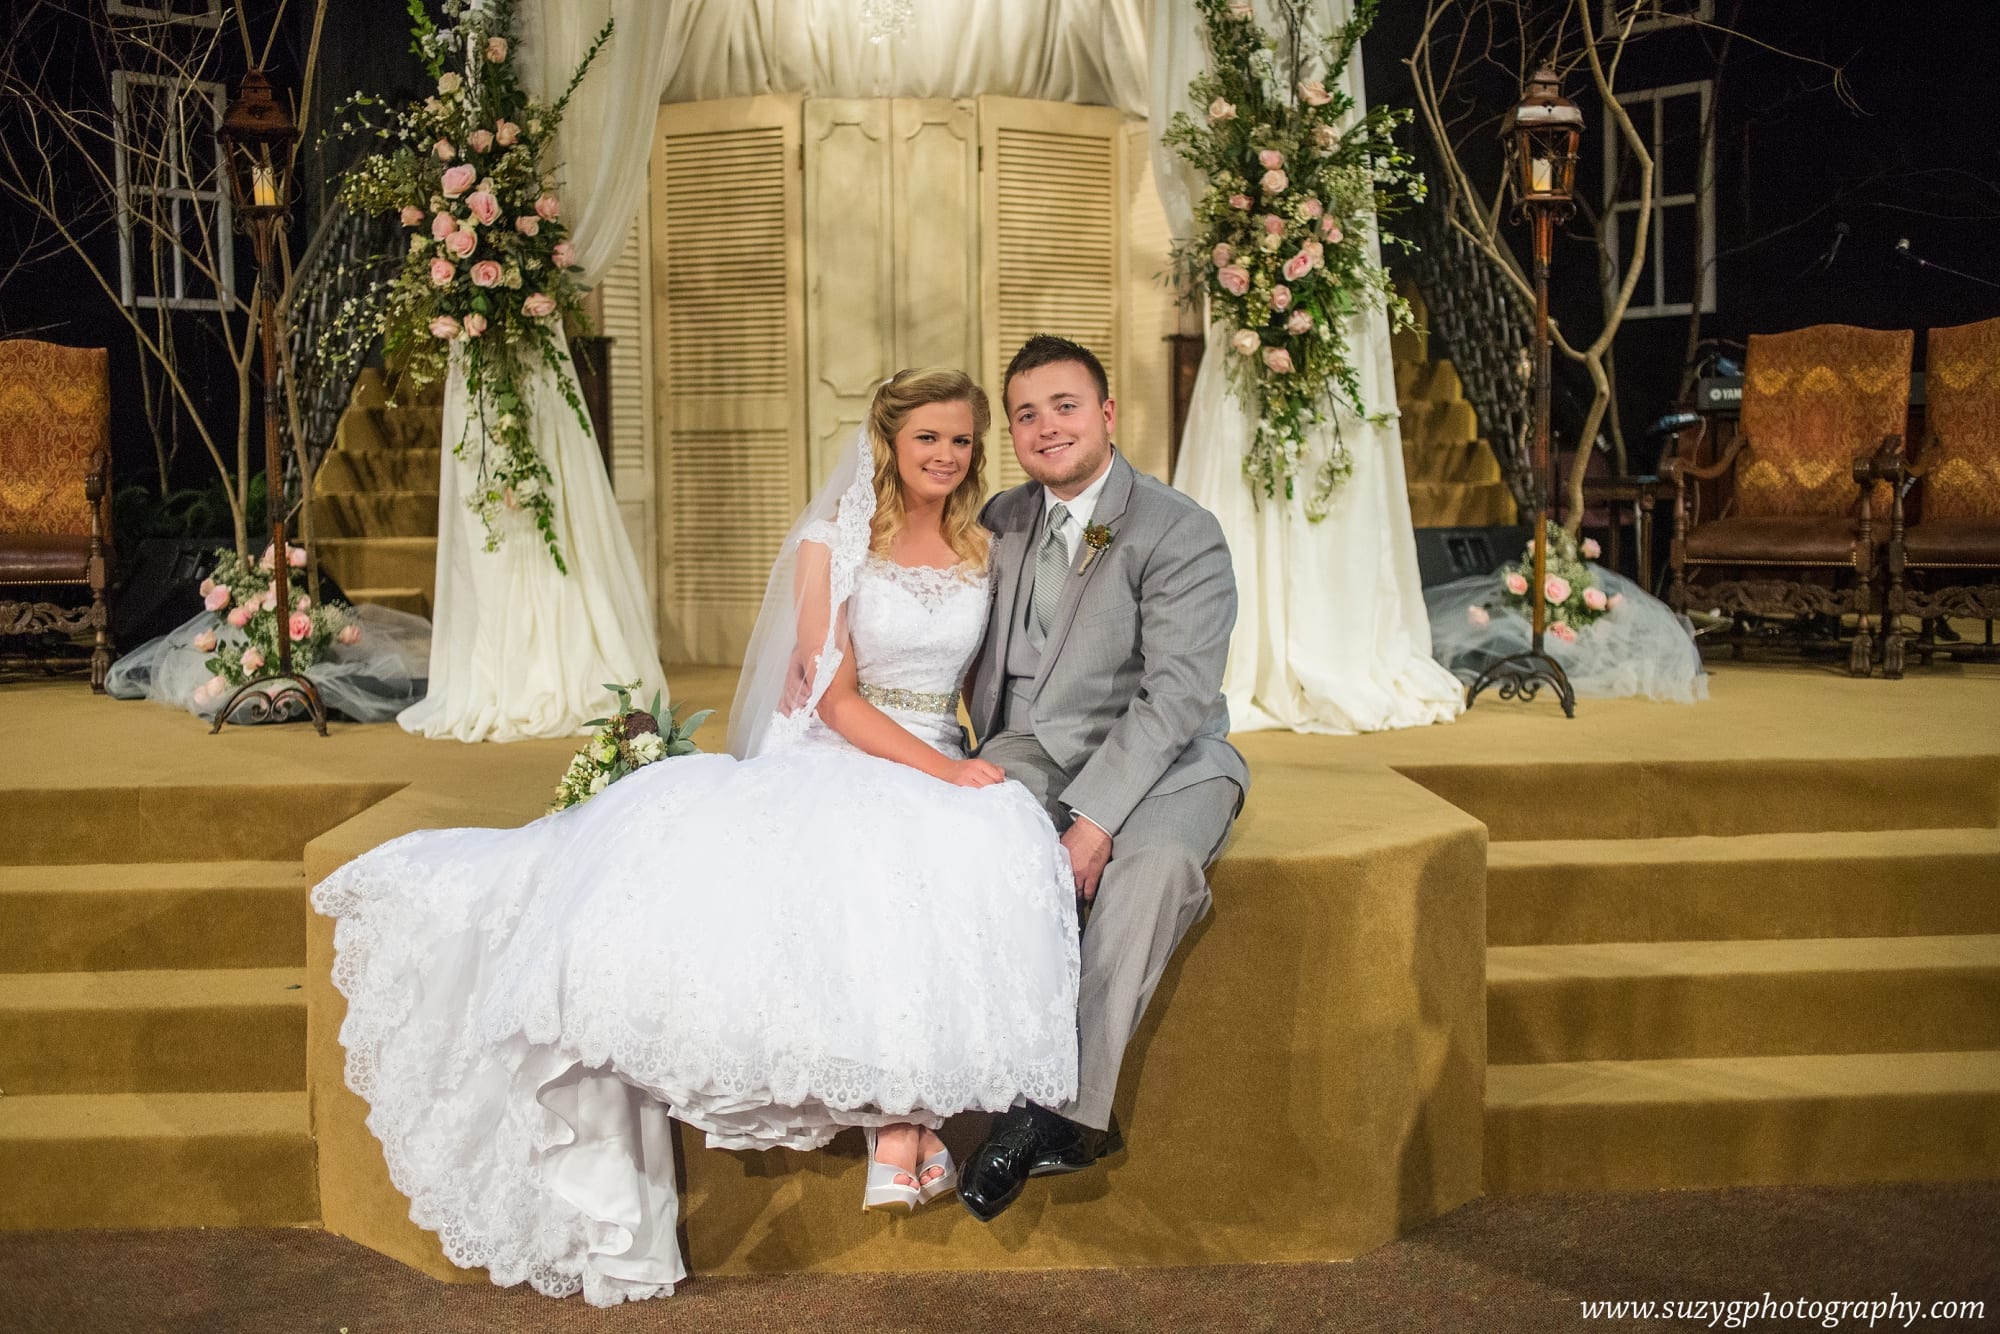 vows by victoria-lake charles-wedding-photography-suzy g-photography-suzygphotography_0070